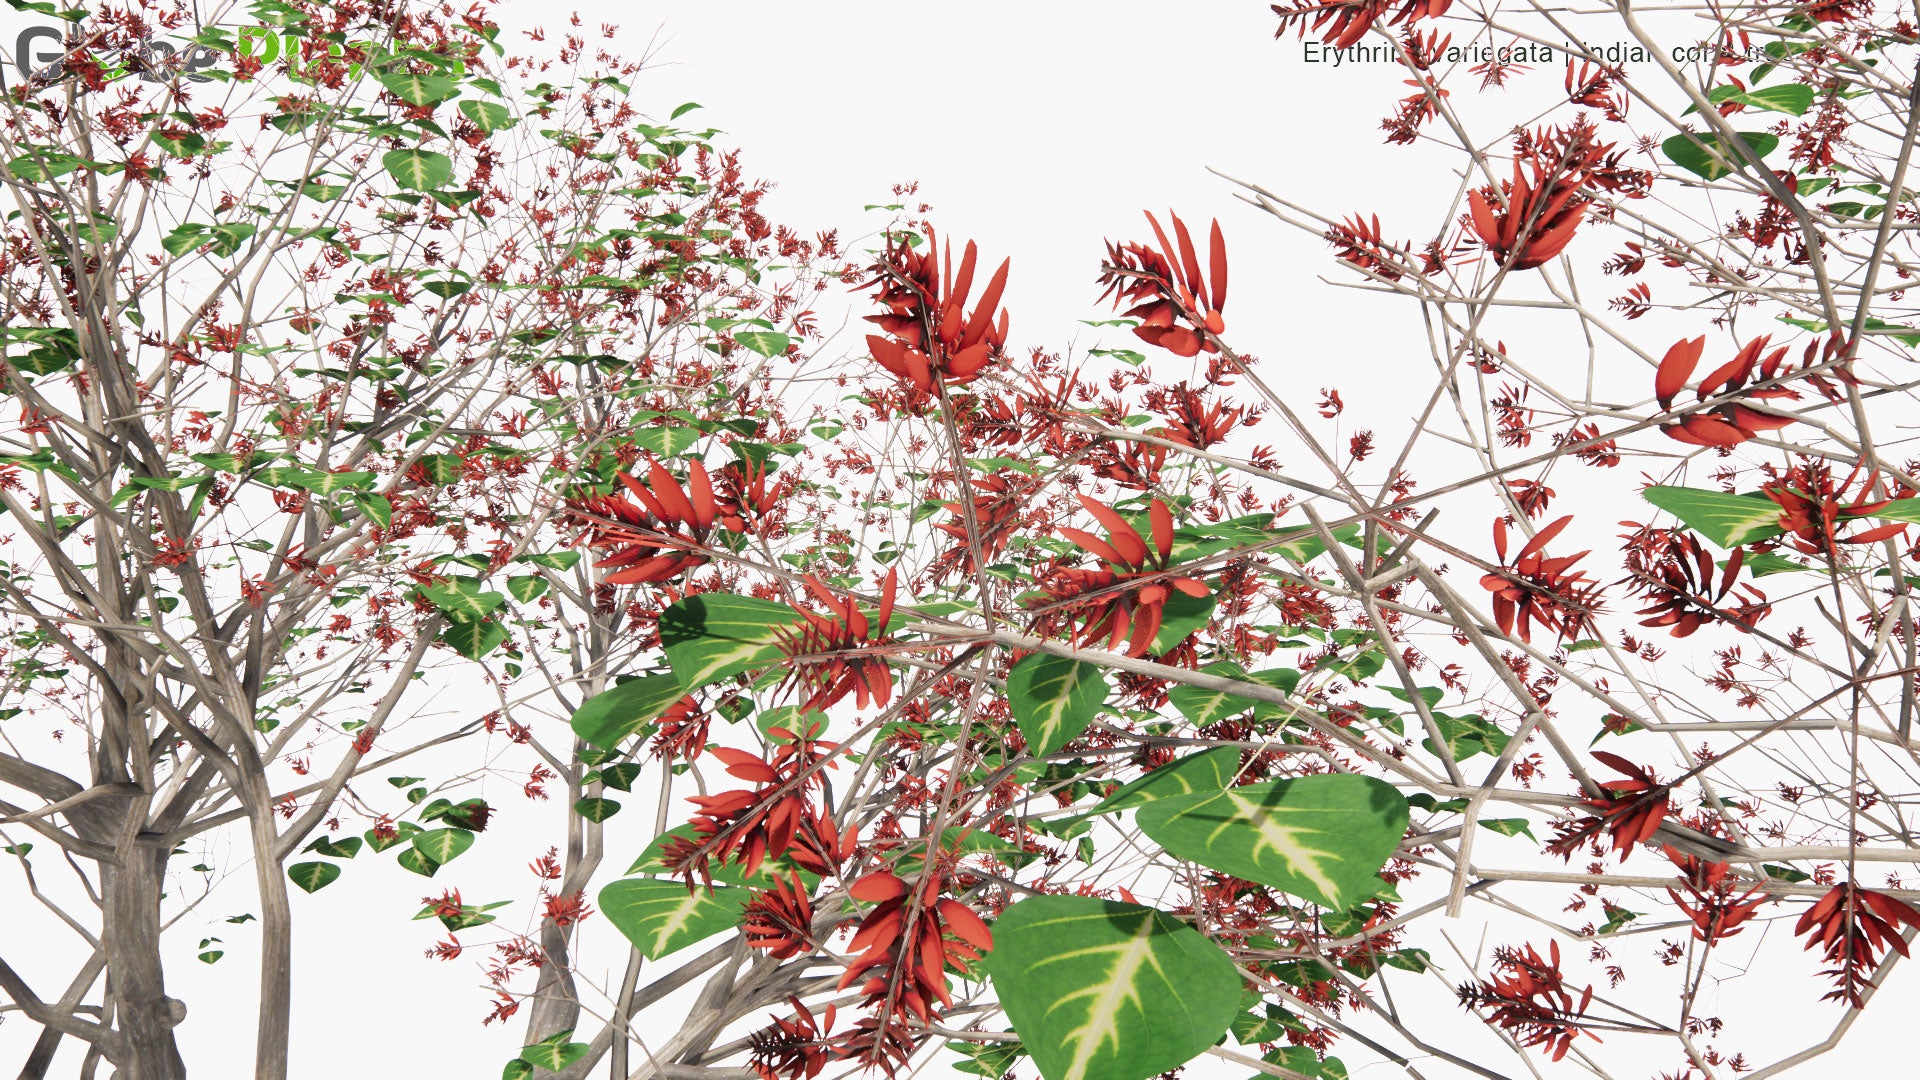 Low Poly Erythrina Variegata - Indian Coral Tree, Tiger's Claw (3D Model)